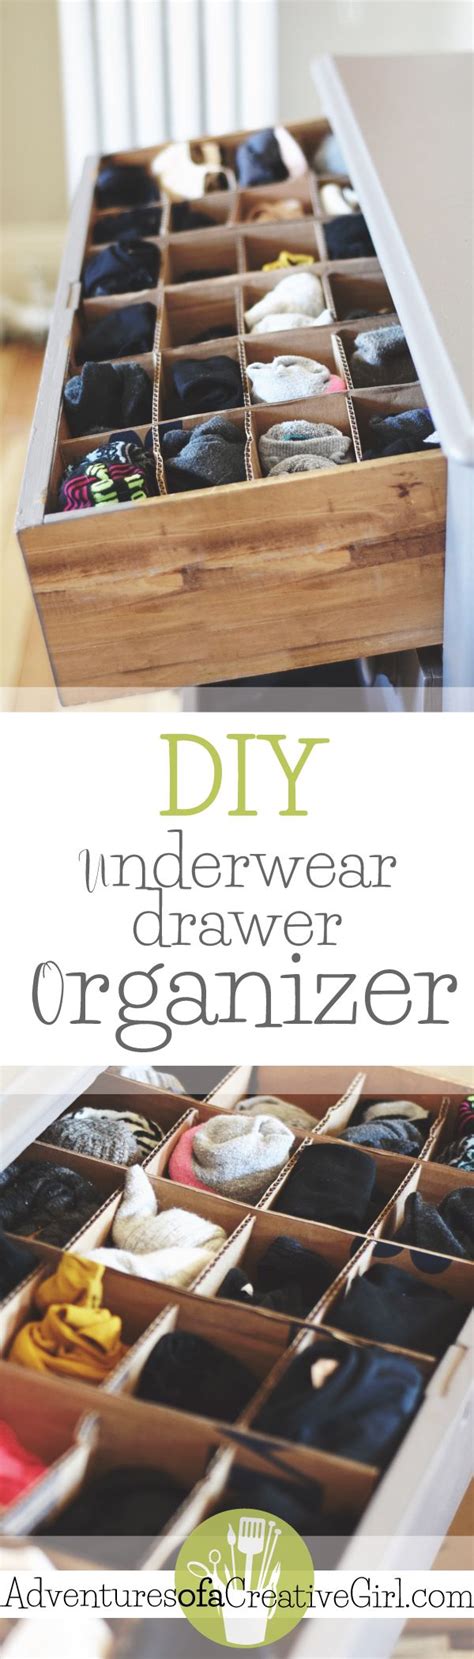 The box is clear enough that you can see what kinds of innerwear and underwear you've placed there before. Underwear Drawer Organizer - DIY | Duct tape, House and Underwear